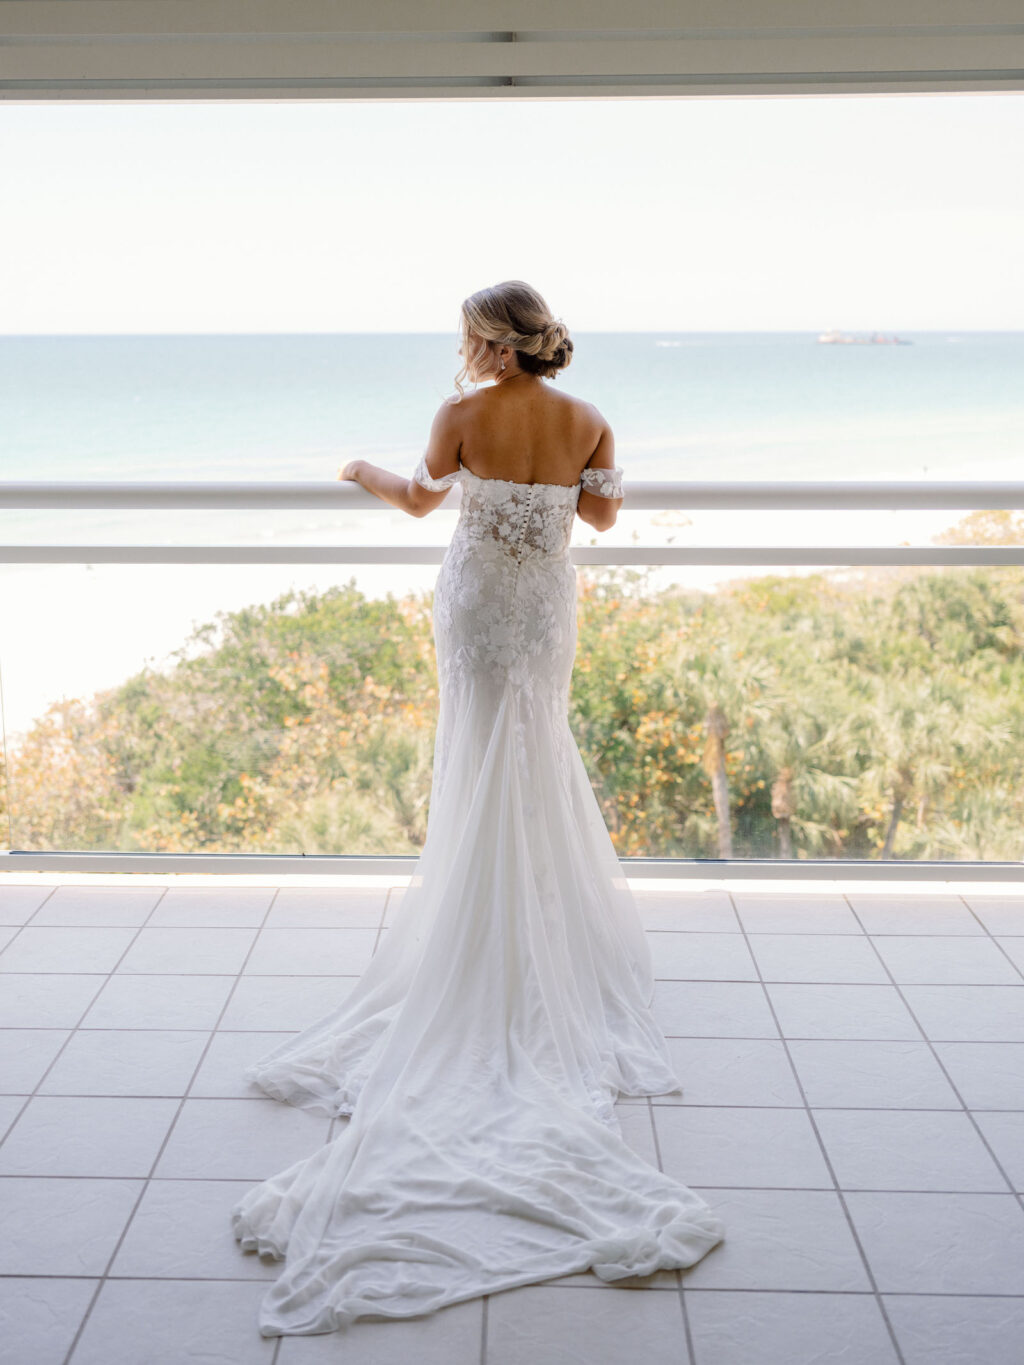 Florida Bride Getting Ready Overlooking Balcony of Gulf of Mexico, Wearing Provinias Wedding Dress with Floral Off the Shoulder Sleeves | Sarasota Wedding Venue The Resort at Longboat Key Club